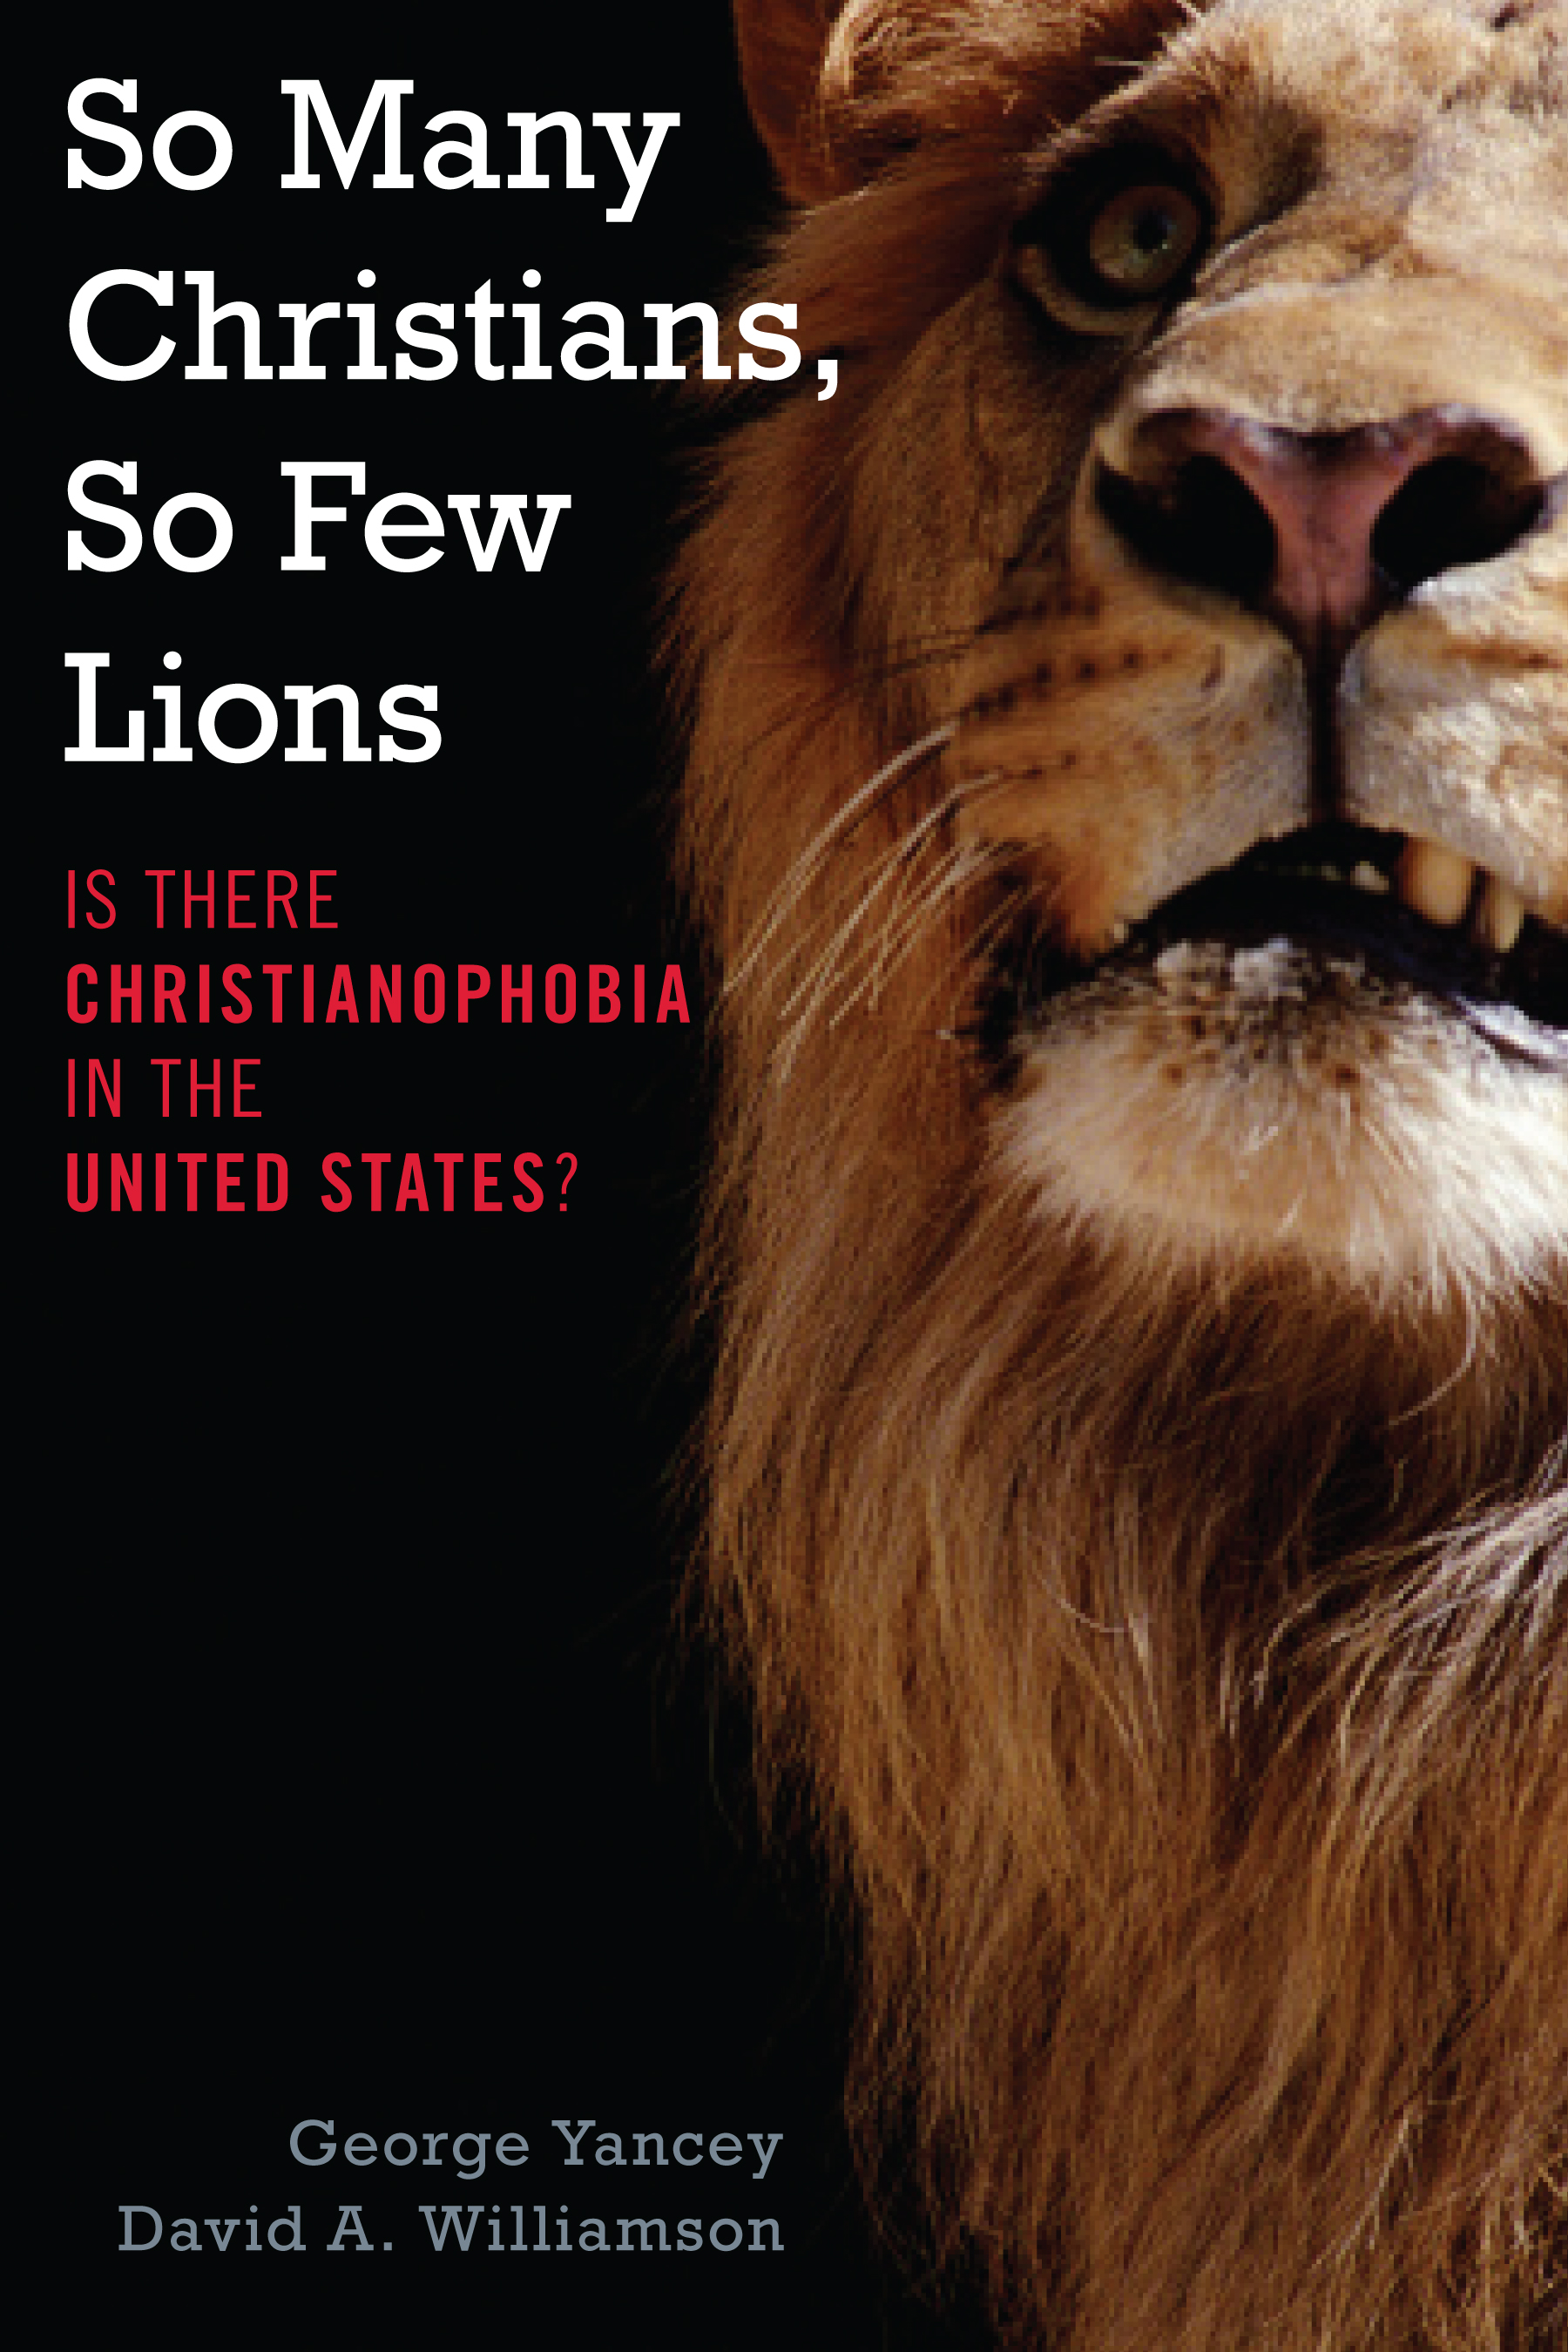 So Many Christians, So Few Lions: Is There Christianophobia in the United States?